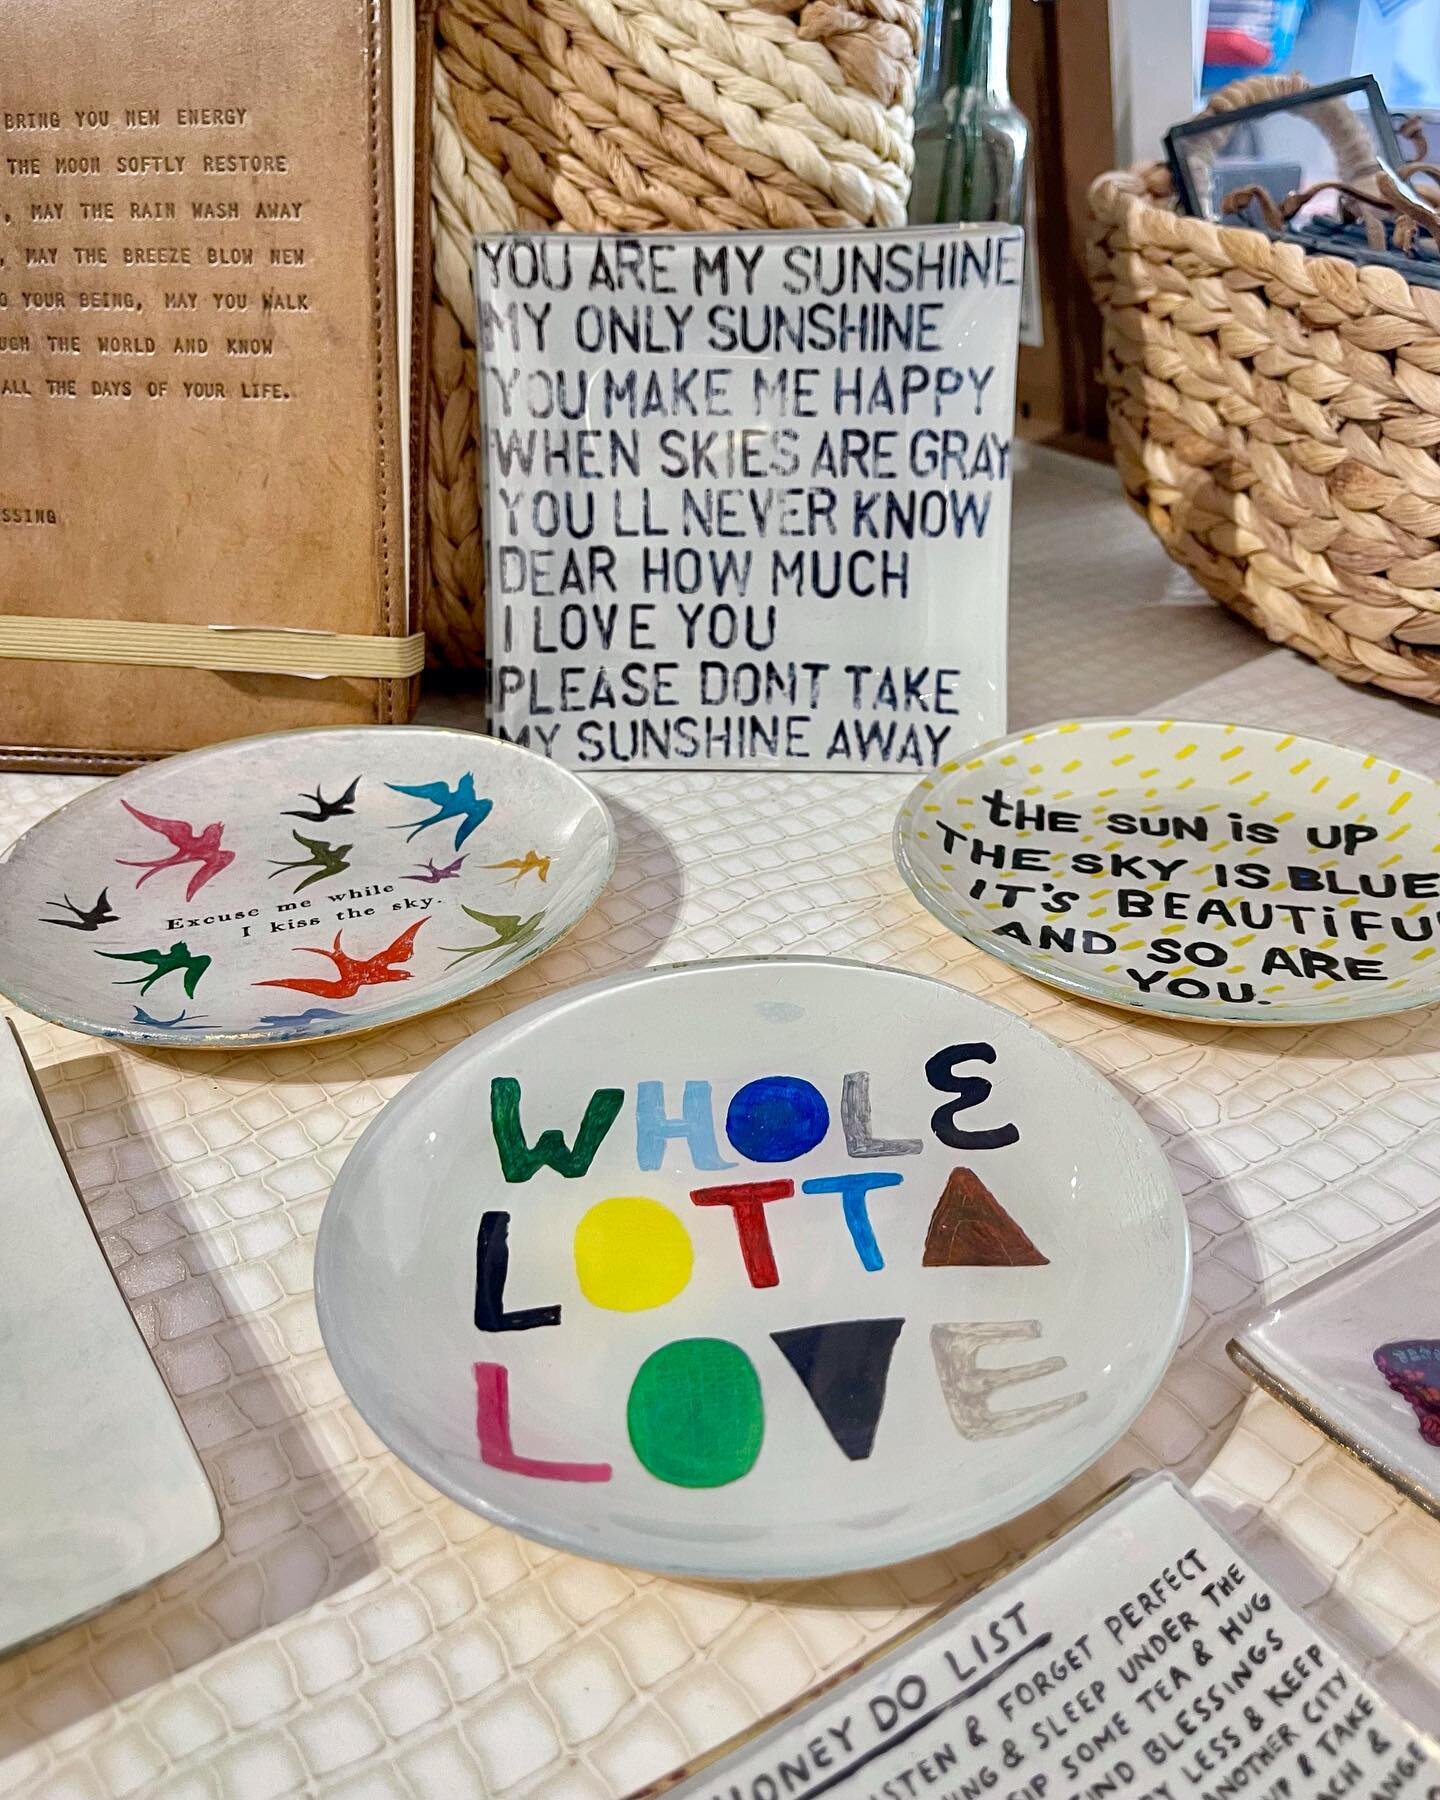 New Sugarboo plates are in! Stop by the Novato store and check out all the beautiful designs and sayings! #downtownnovatobusinessassociation  #downtownnovato #shoplocal #redhillshoppingcenter